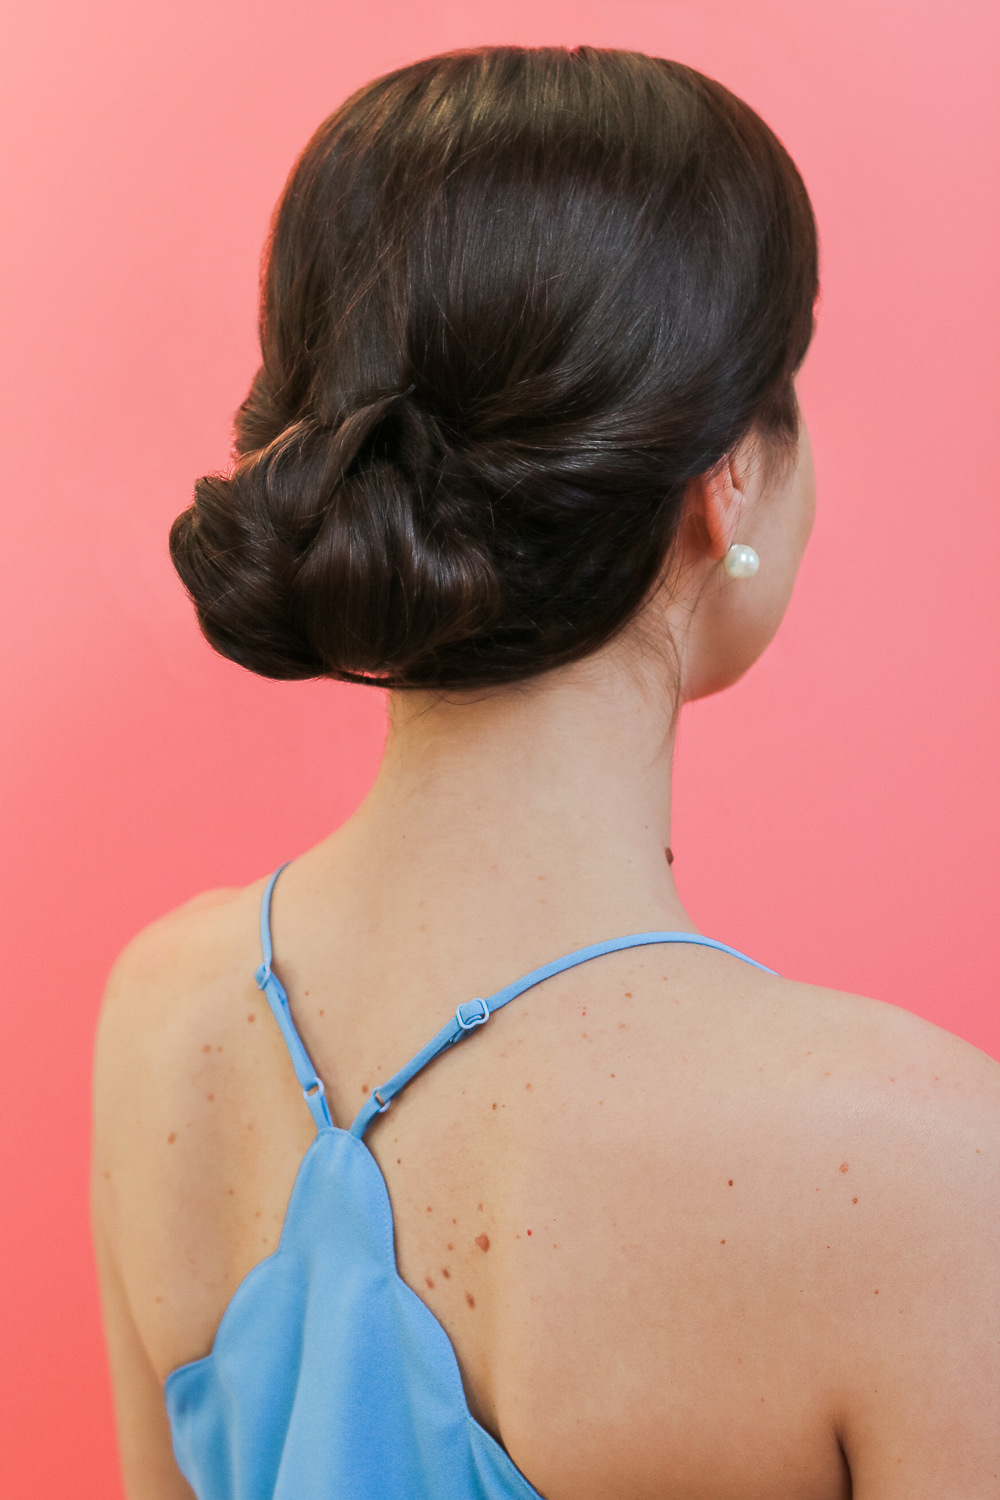 Easy Braided Chignon Tutorial and At-Home Hair Dye Tips by Stephanie Ziajka from the popular beauty blog Diary of a Debutante, easy dressy hairstyles for long hair, undone chignon tutorial, Schwarzkopf Color Ultime hair color review, Schwarzkopf Color Ultime 3.8 Deep Brunette